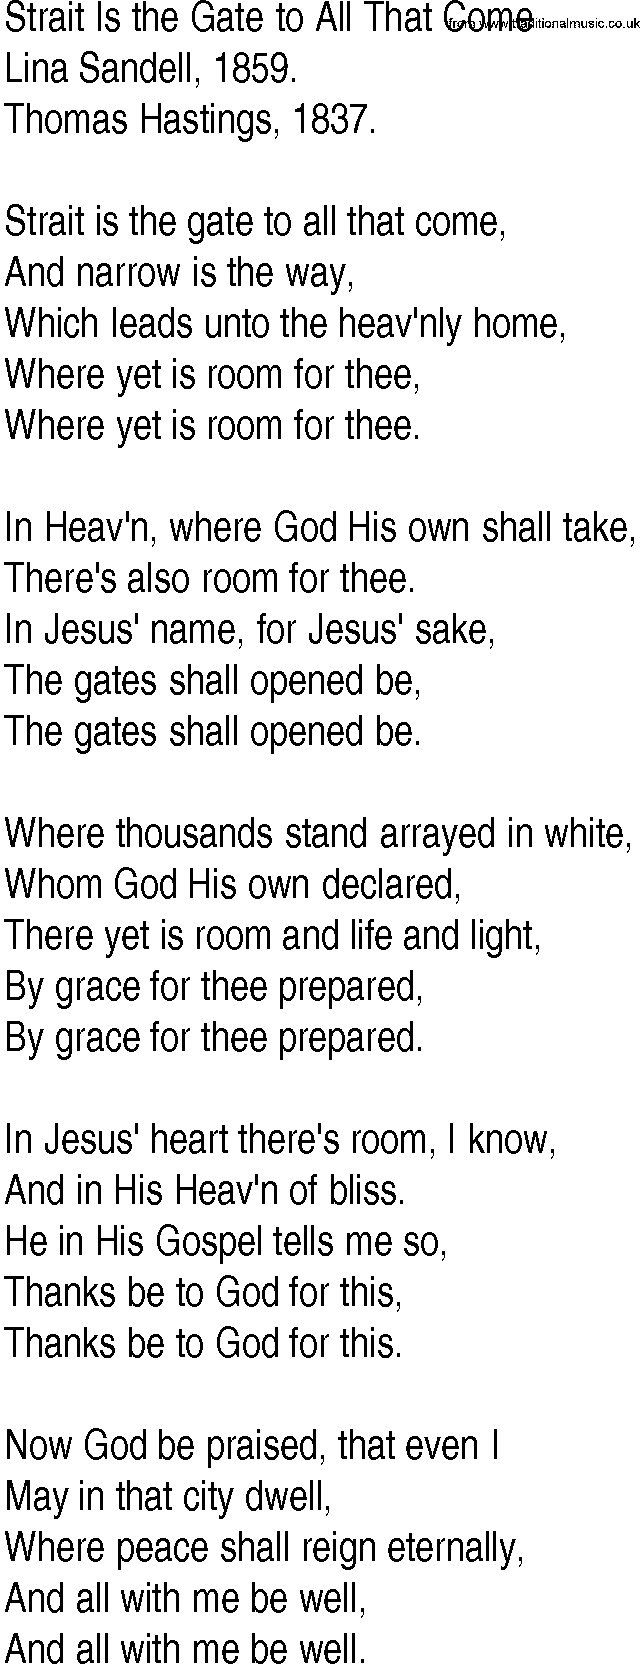 Hymn and Gospel Song: Strait Is the Gate to All That Come by Lina Sandell lyrics